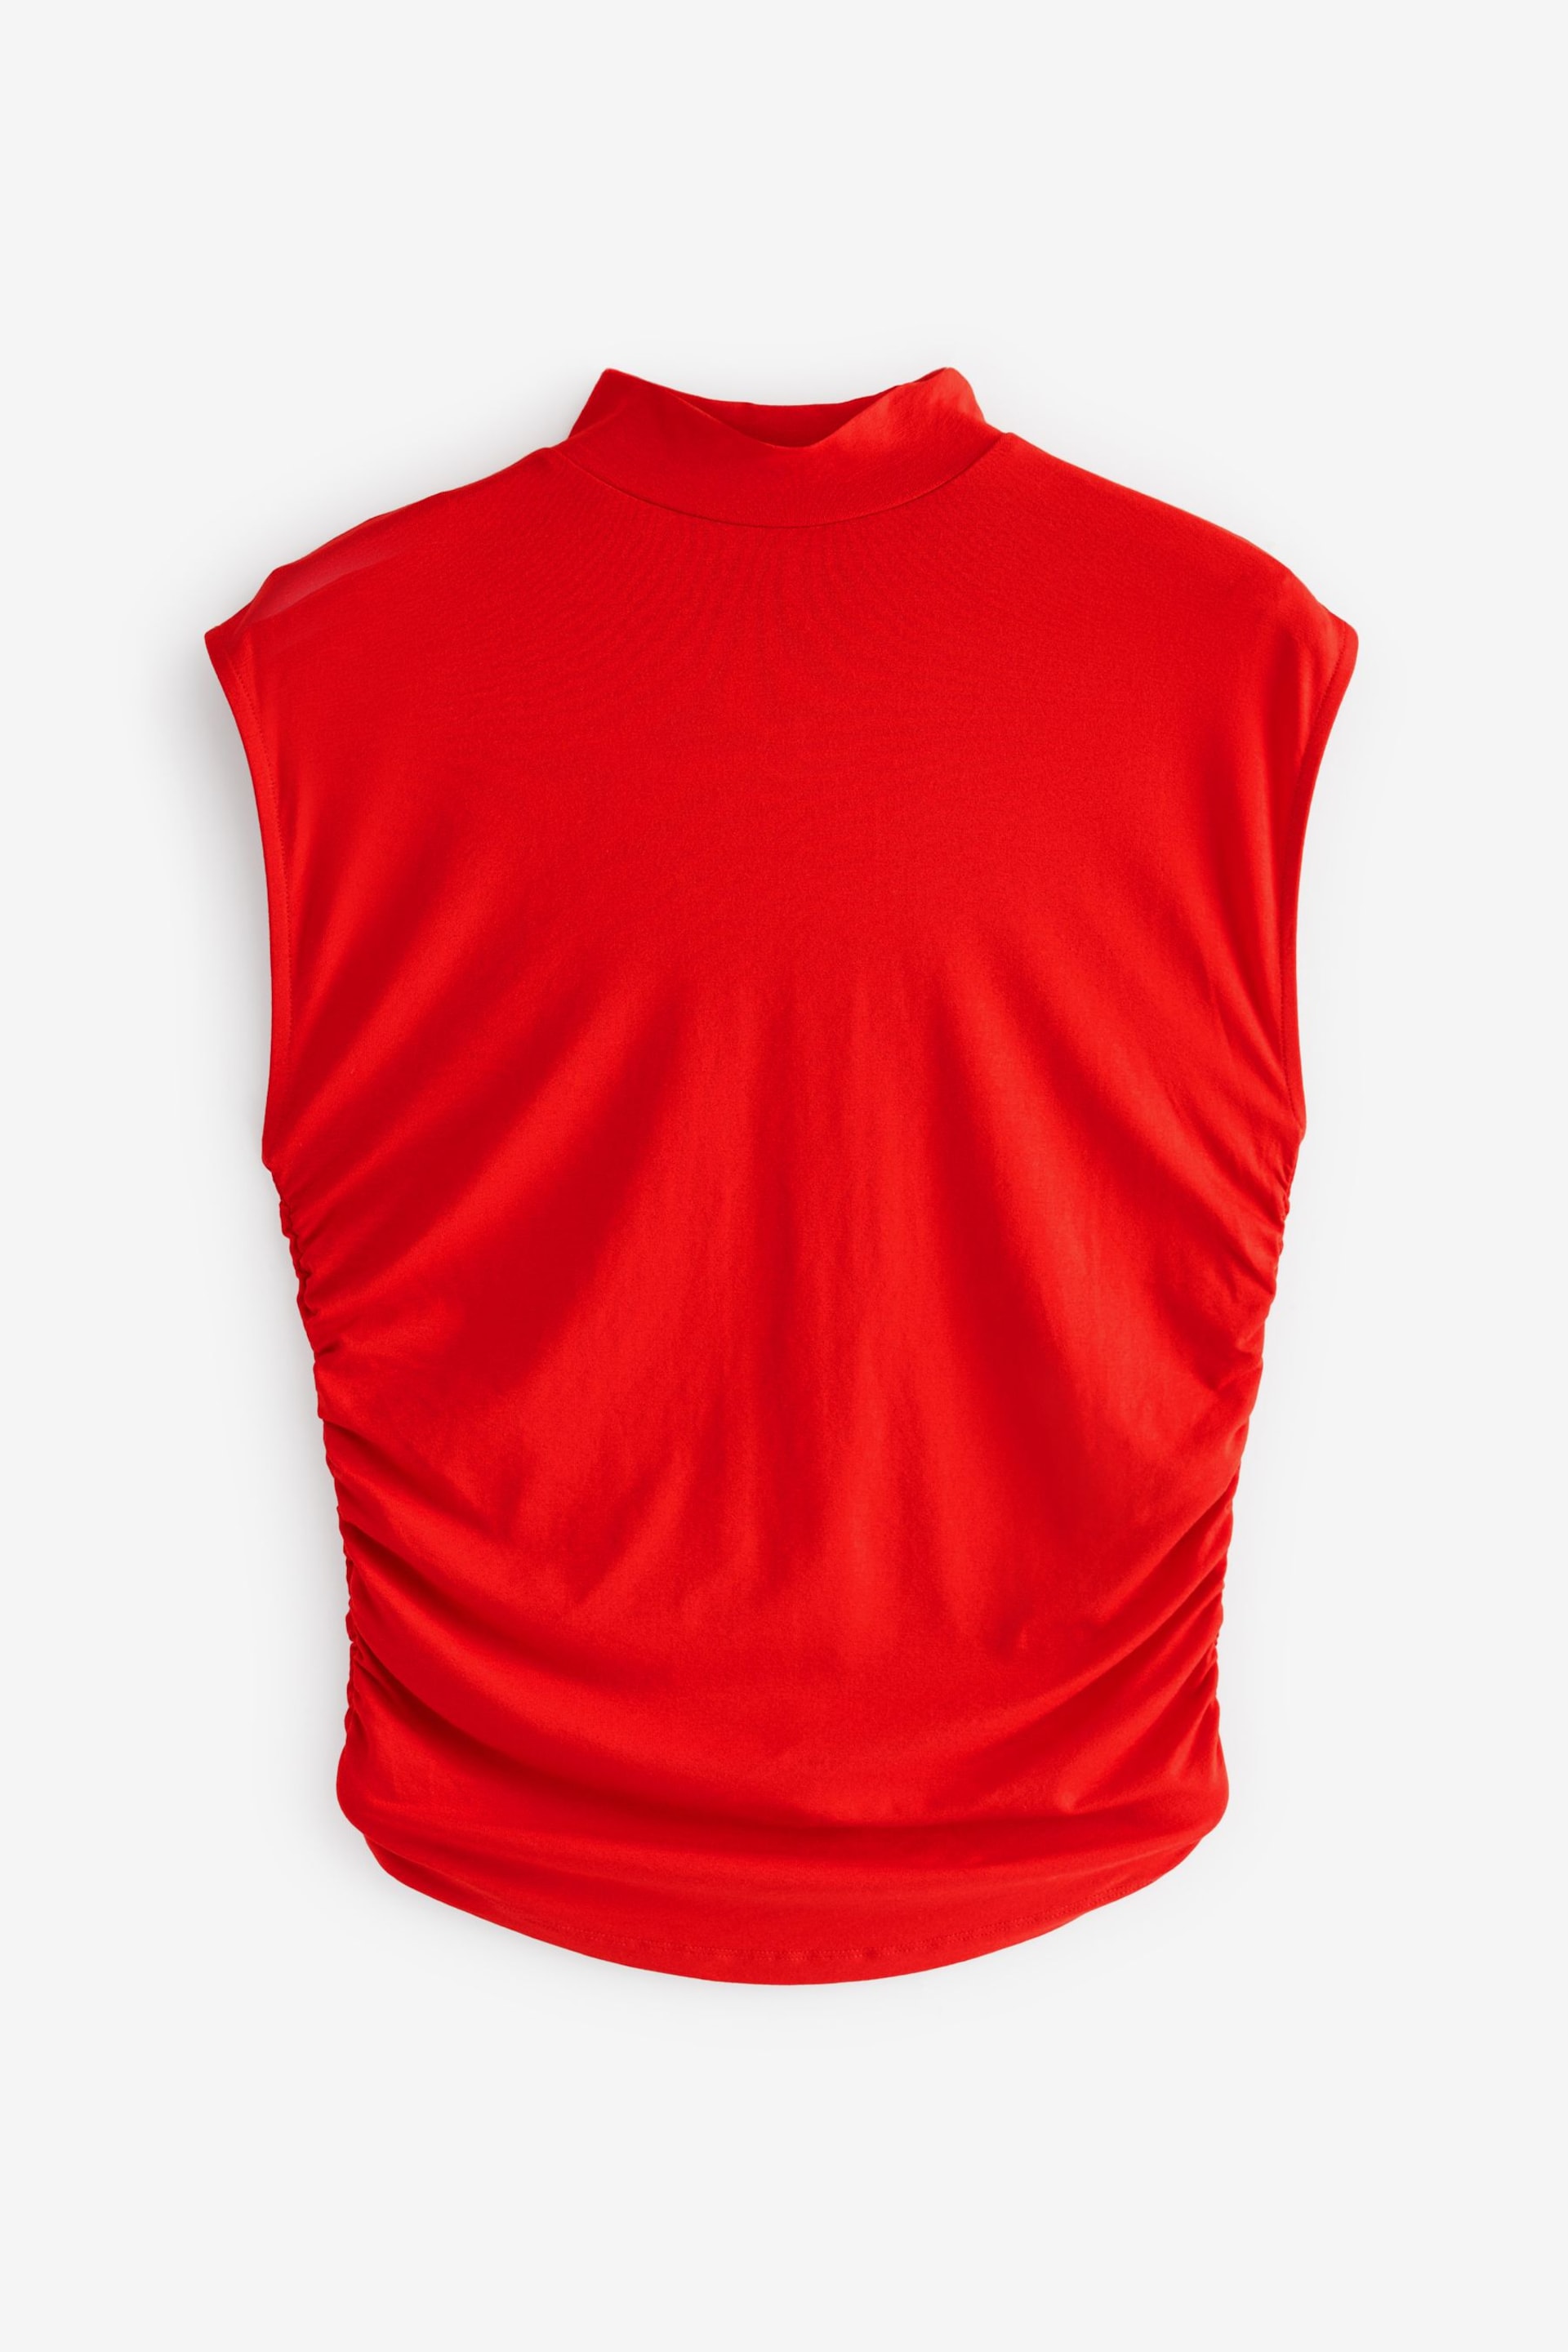 Red Sleeveless High Neck Top - Image 5 of 6